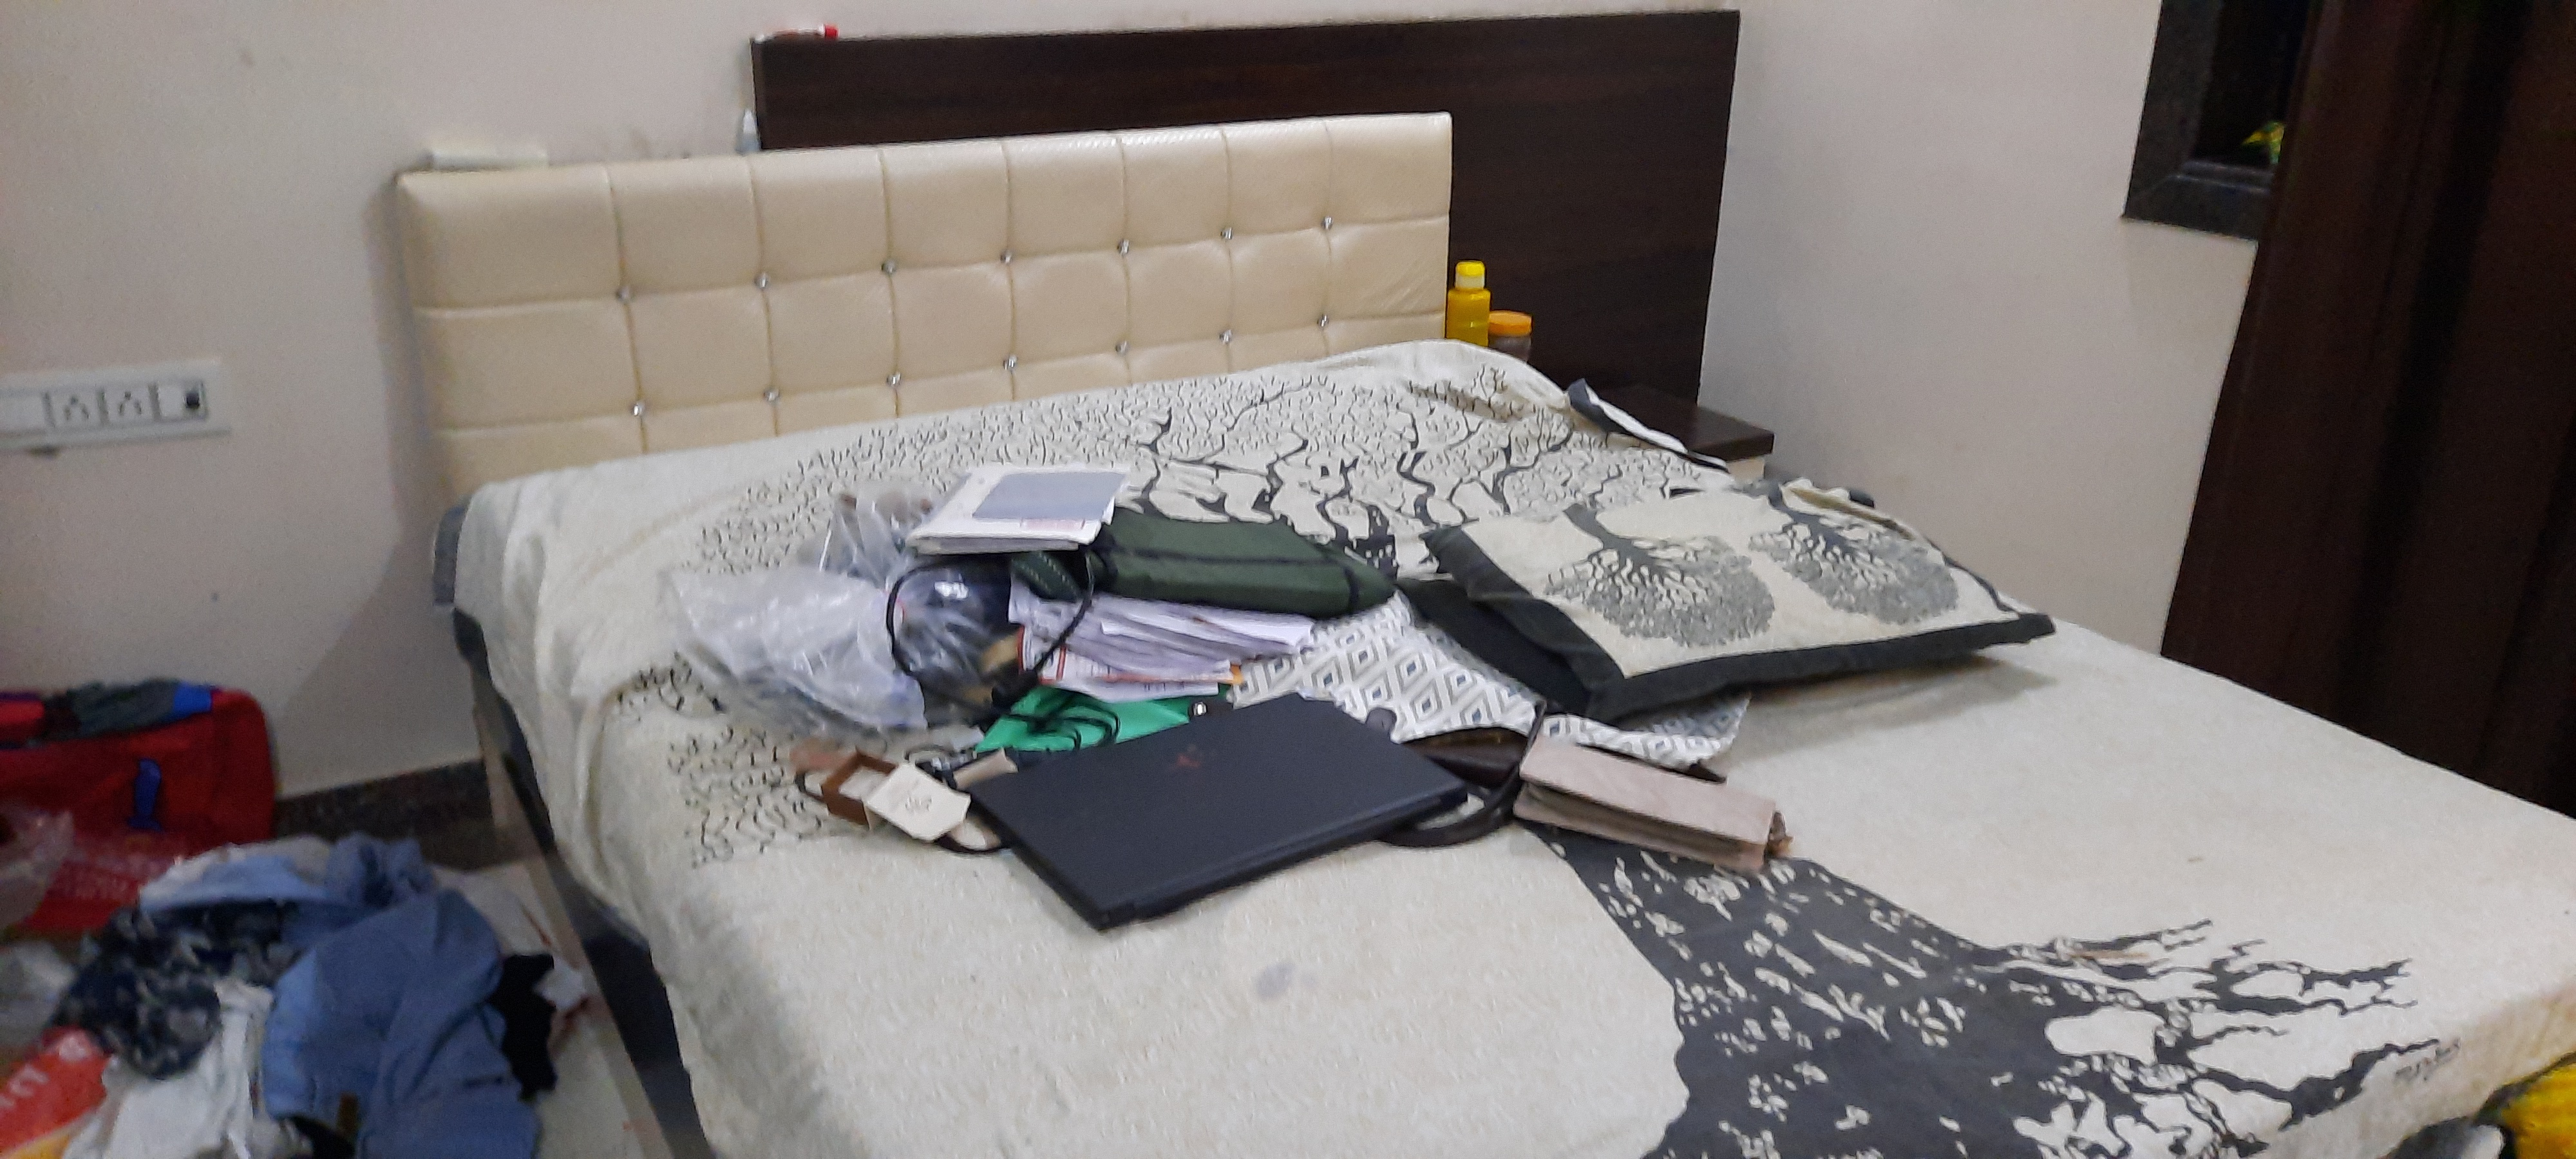 jewelry-and-cash-stolen-from-deserted-house-in-kanker